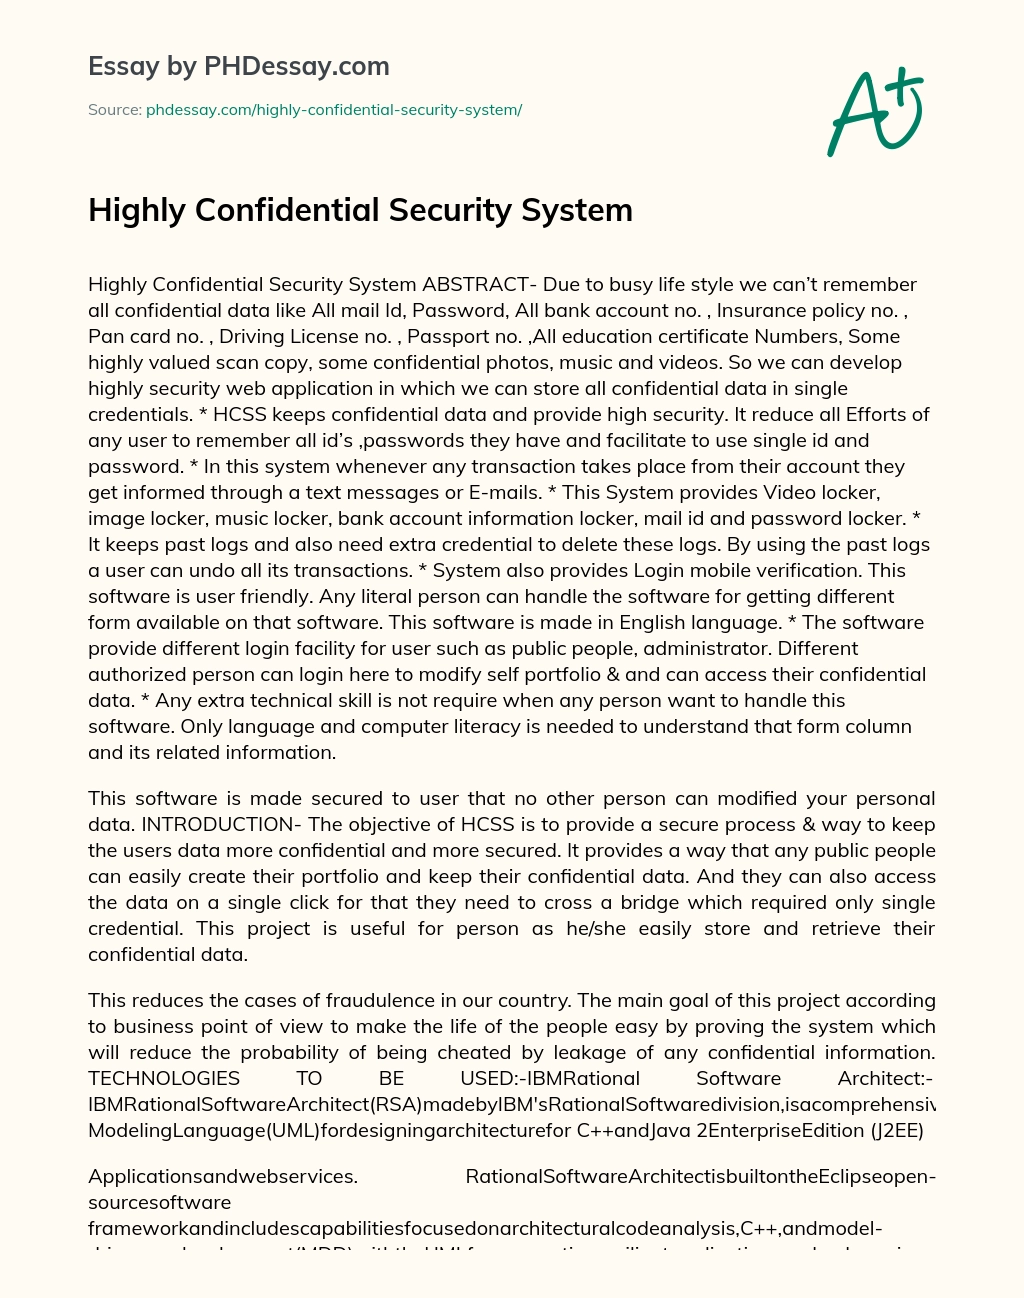 Highly Confidential Security System essay